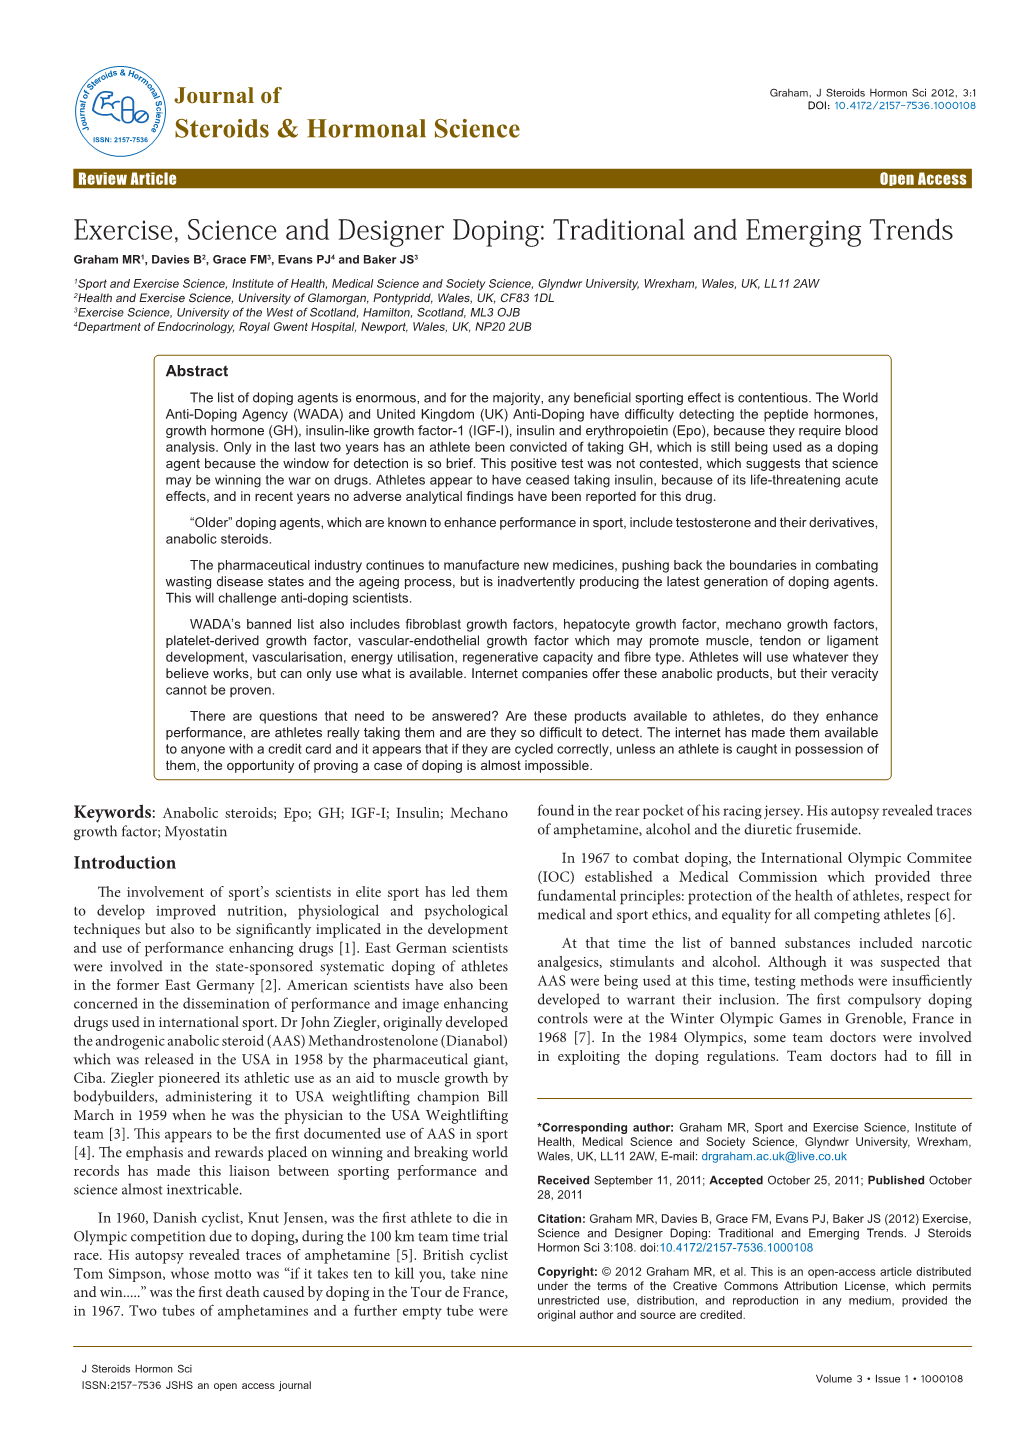 Exercise, Science and Designer Doping: Traditional and Emerging